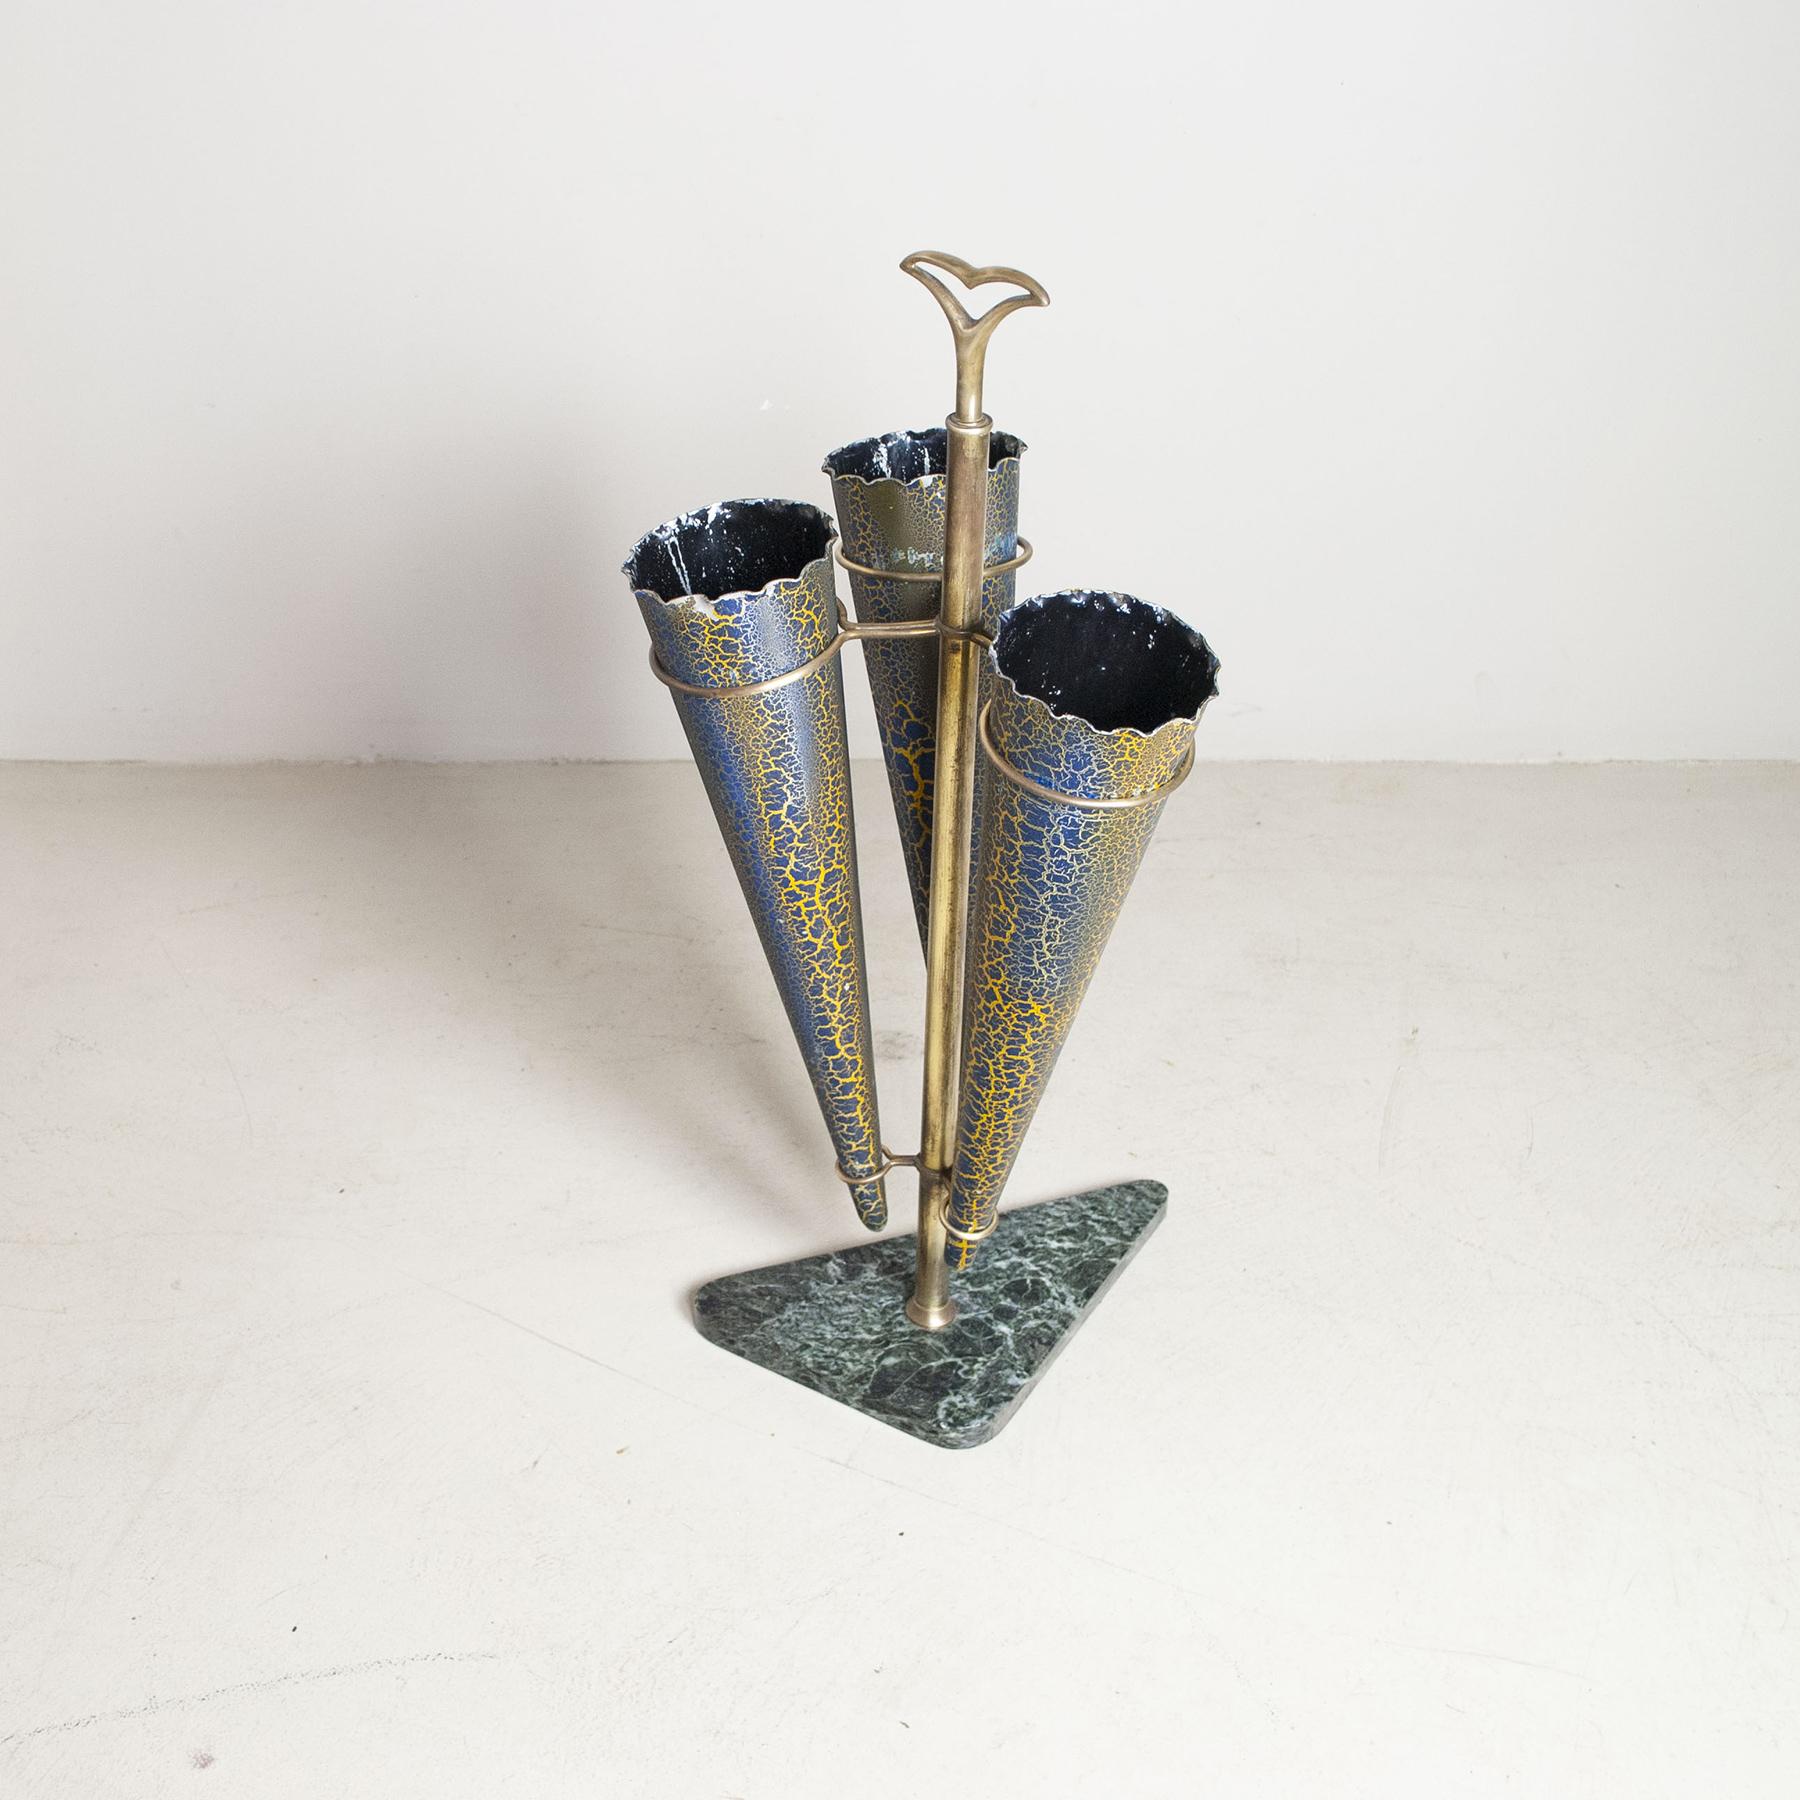 Umbrella stand in worked metal, marble base, brass structure, worked metal containers, production end of 50s.